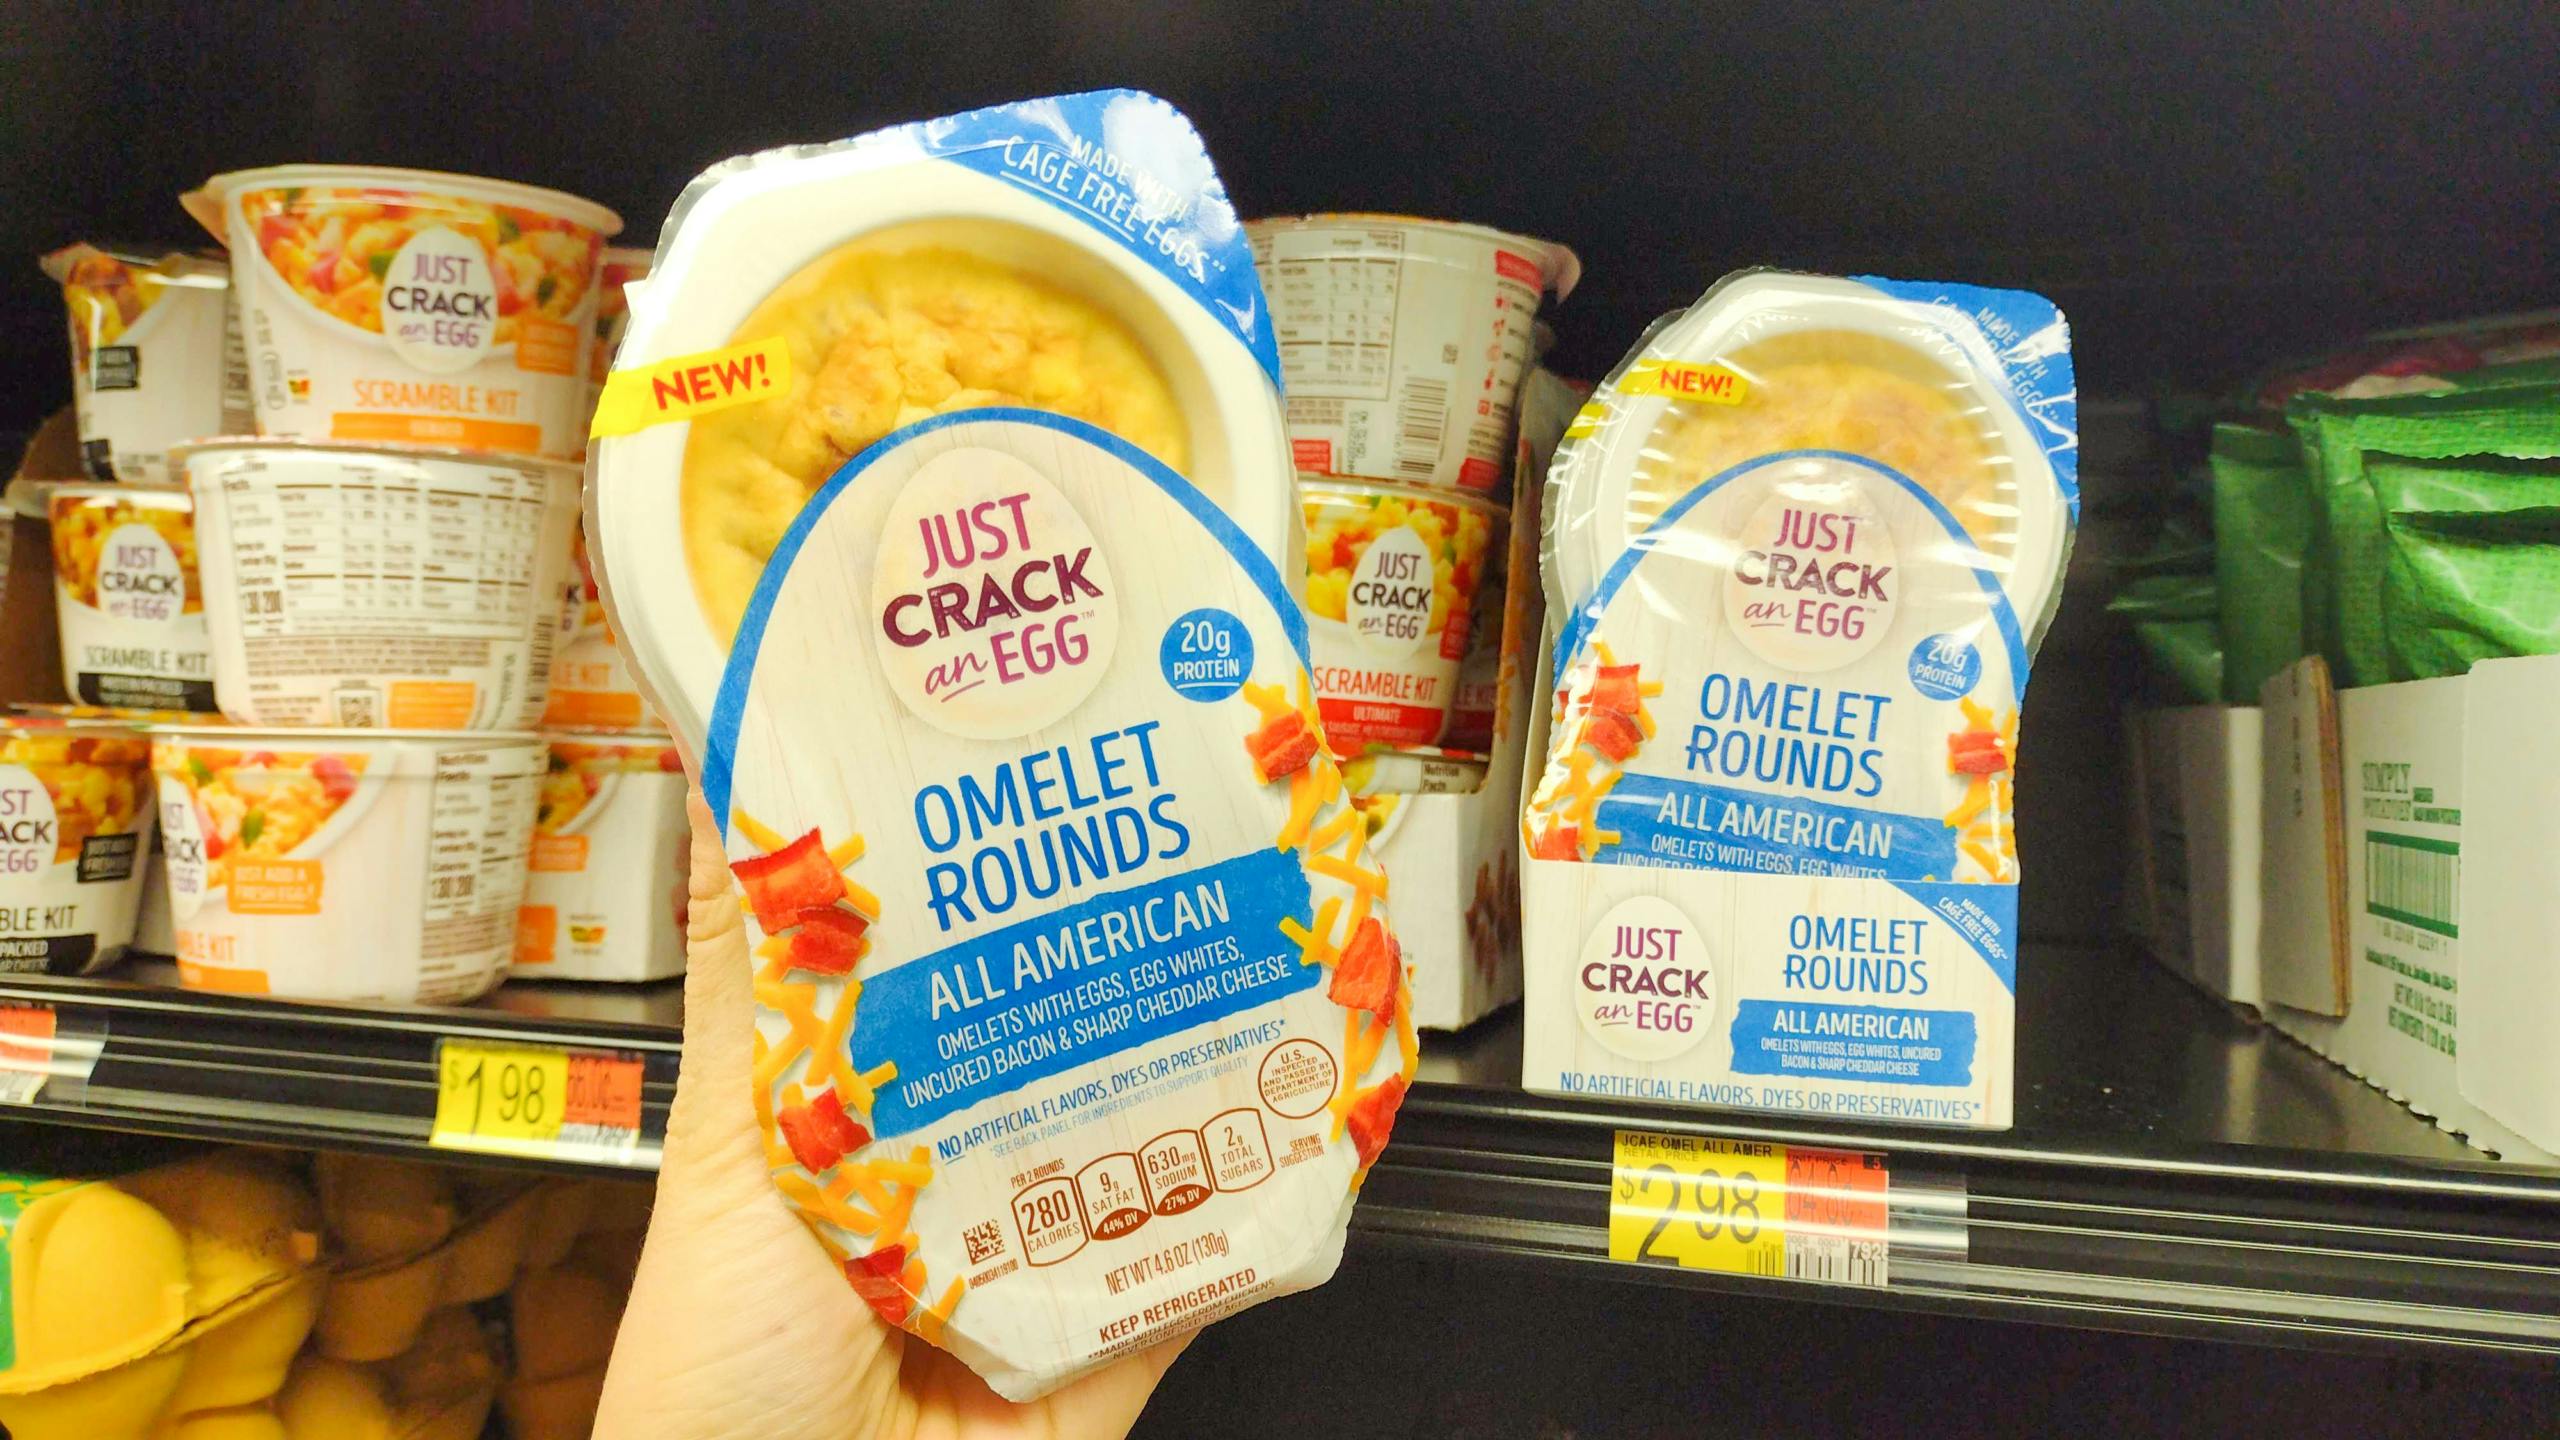 just-crack-an-egg-omelet-rounds-free-at-walmart-the-krazy-coupon-lady